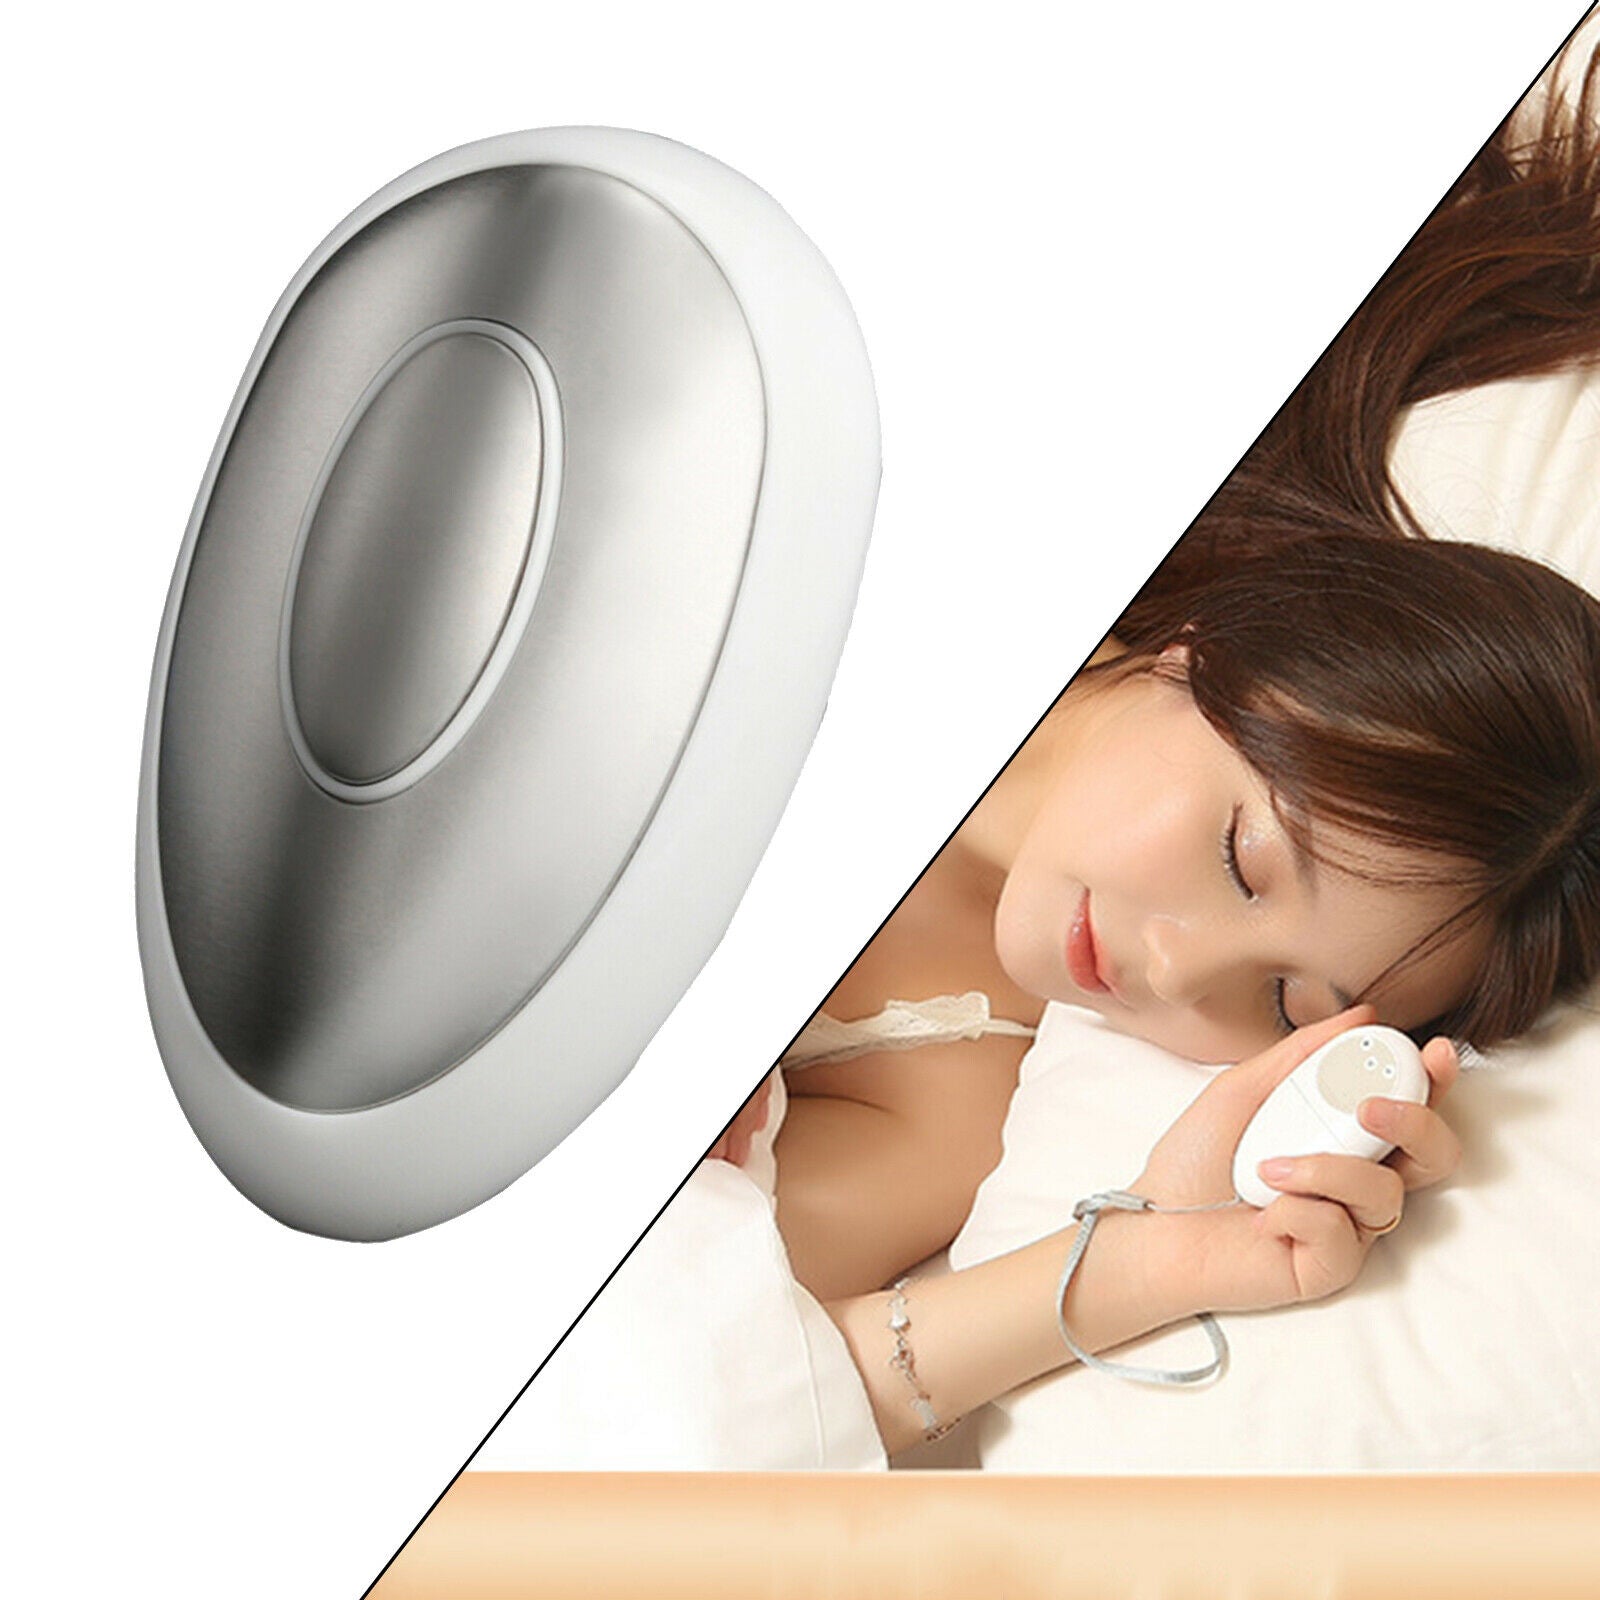 Hand-Held Microcurrent Sleep Holding Device Deep Relaxation Battery Operated